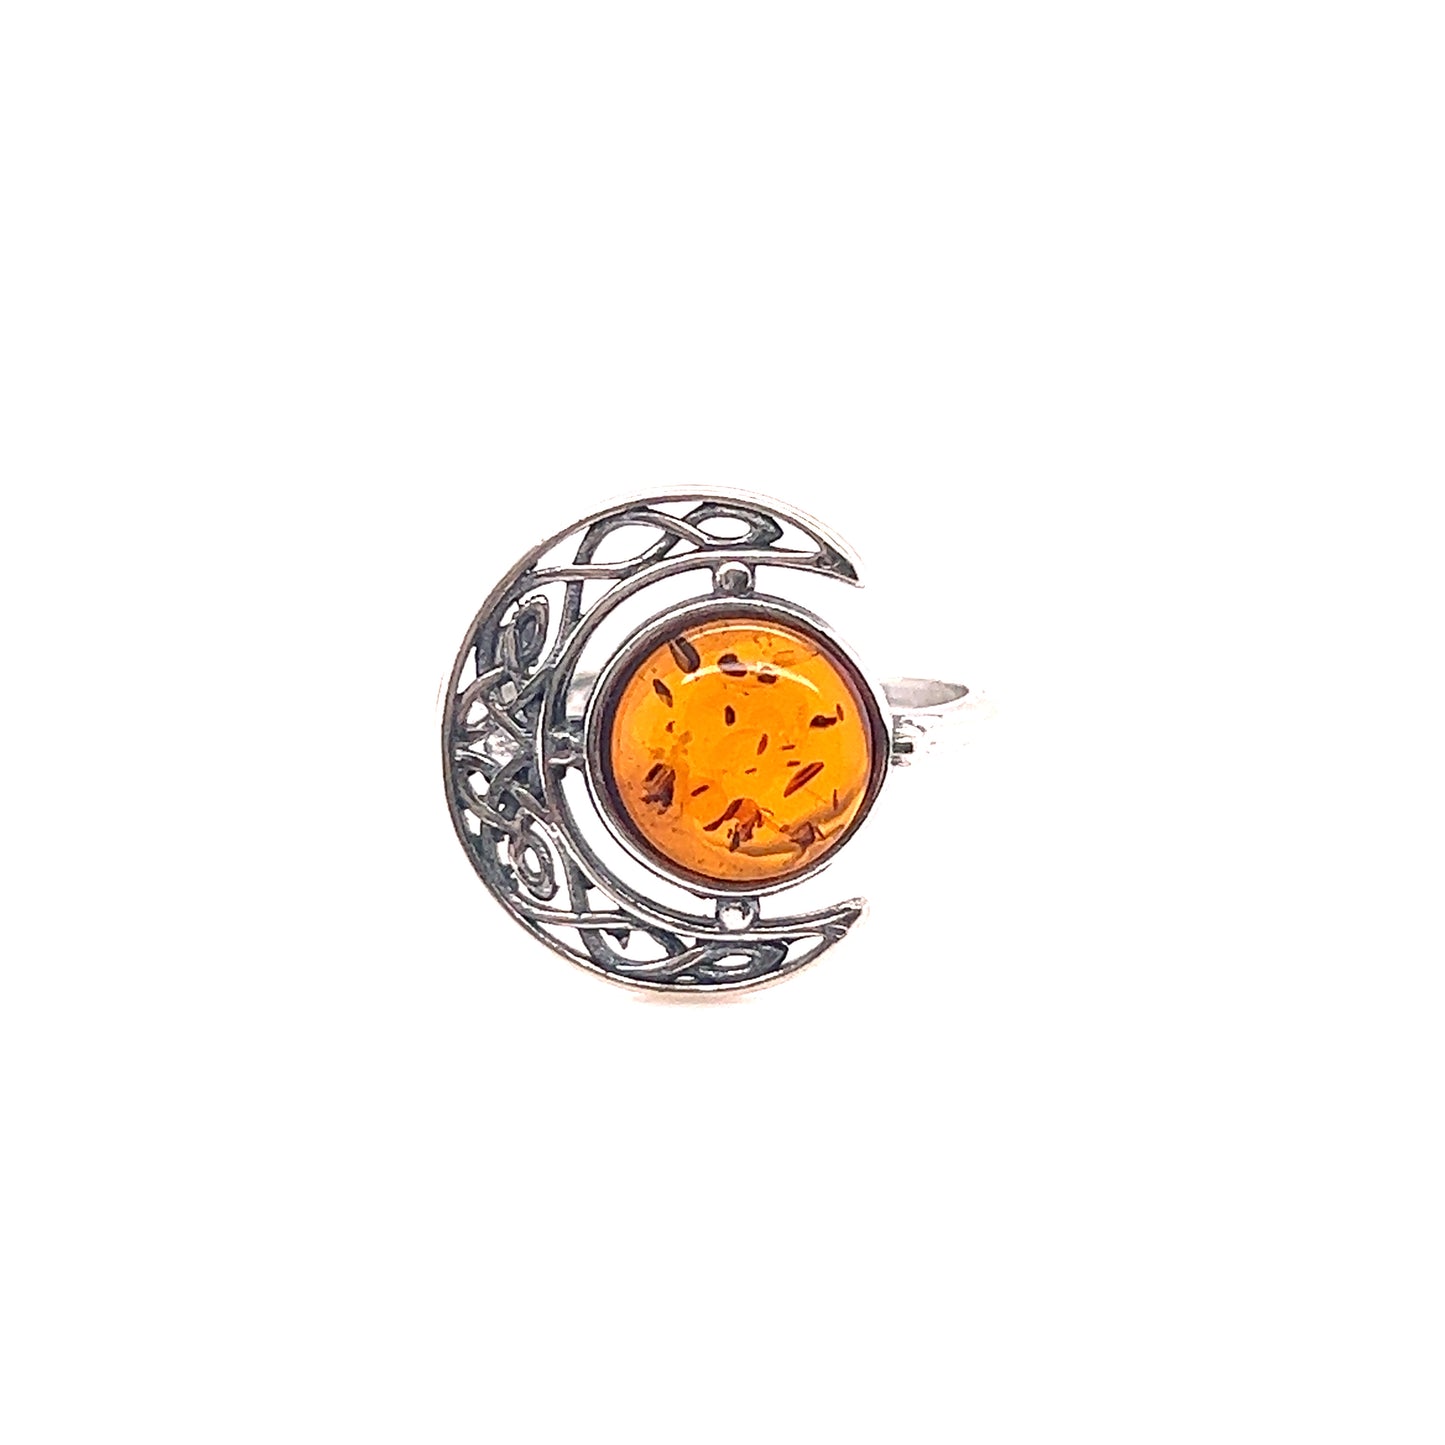 A Super Silver Celtic Amber Crescent Moon Ring with a crescent shaped Baltic amber stone.